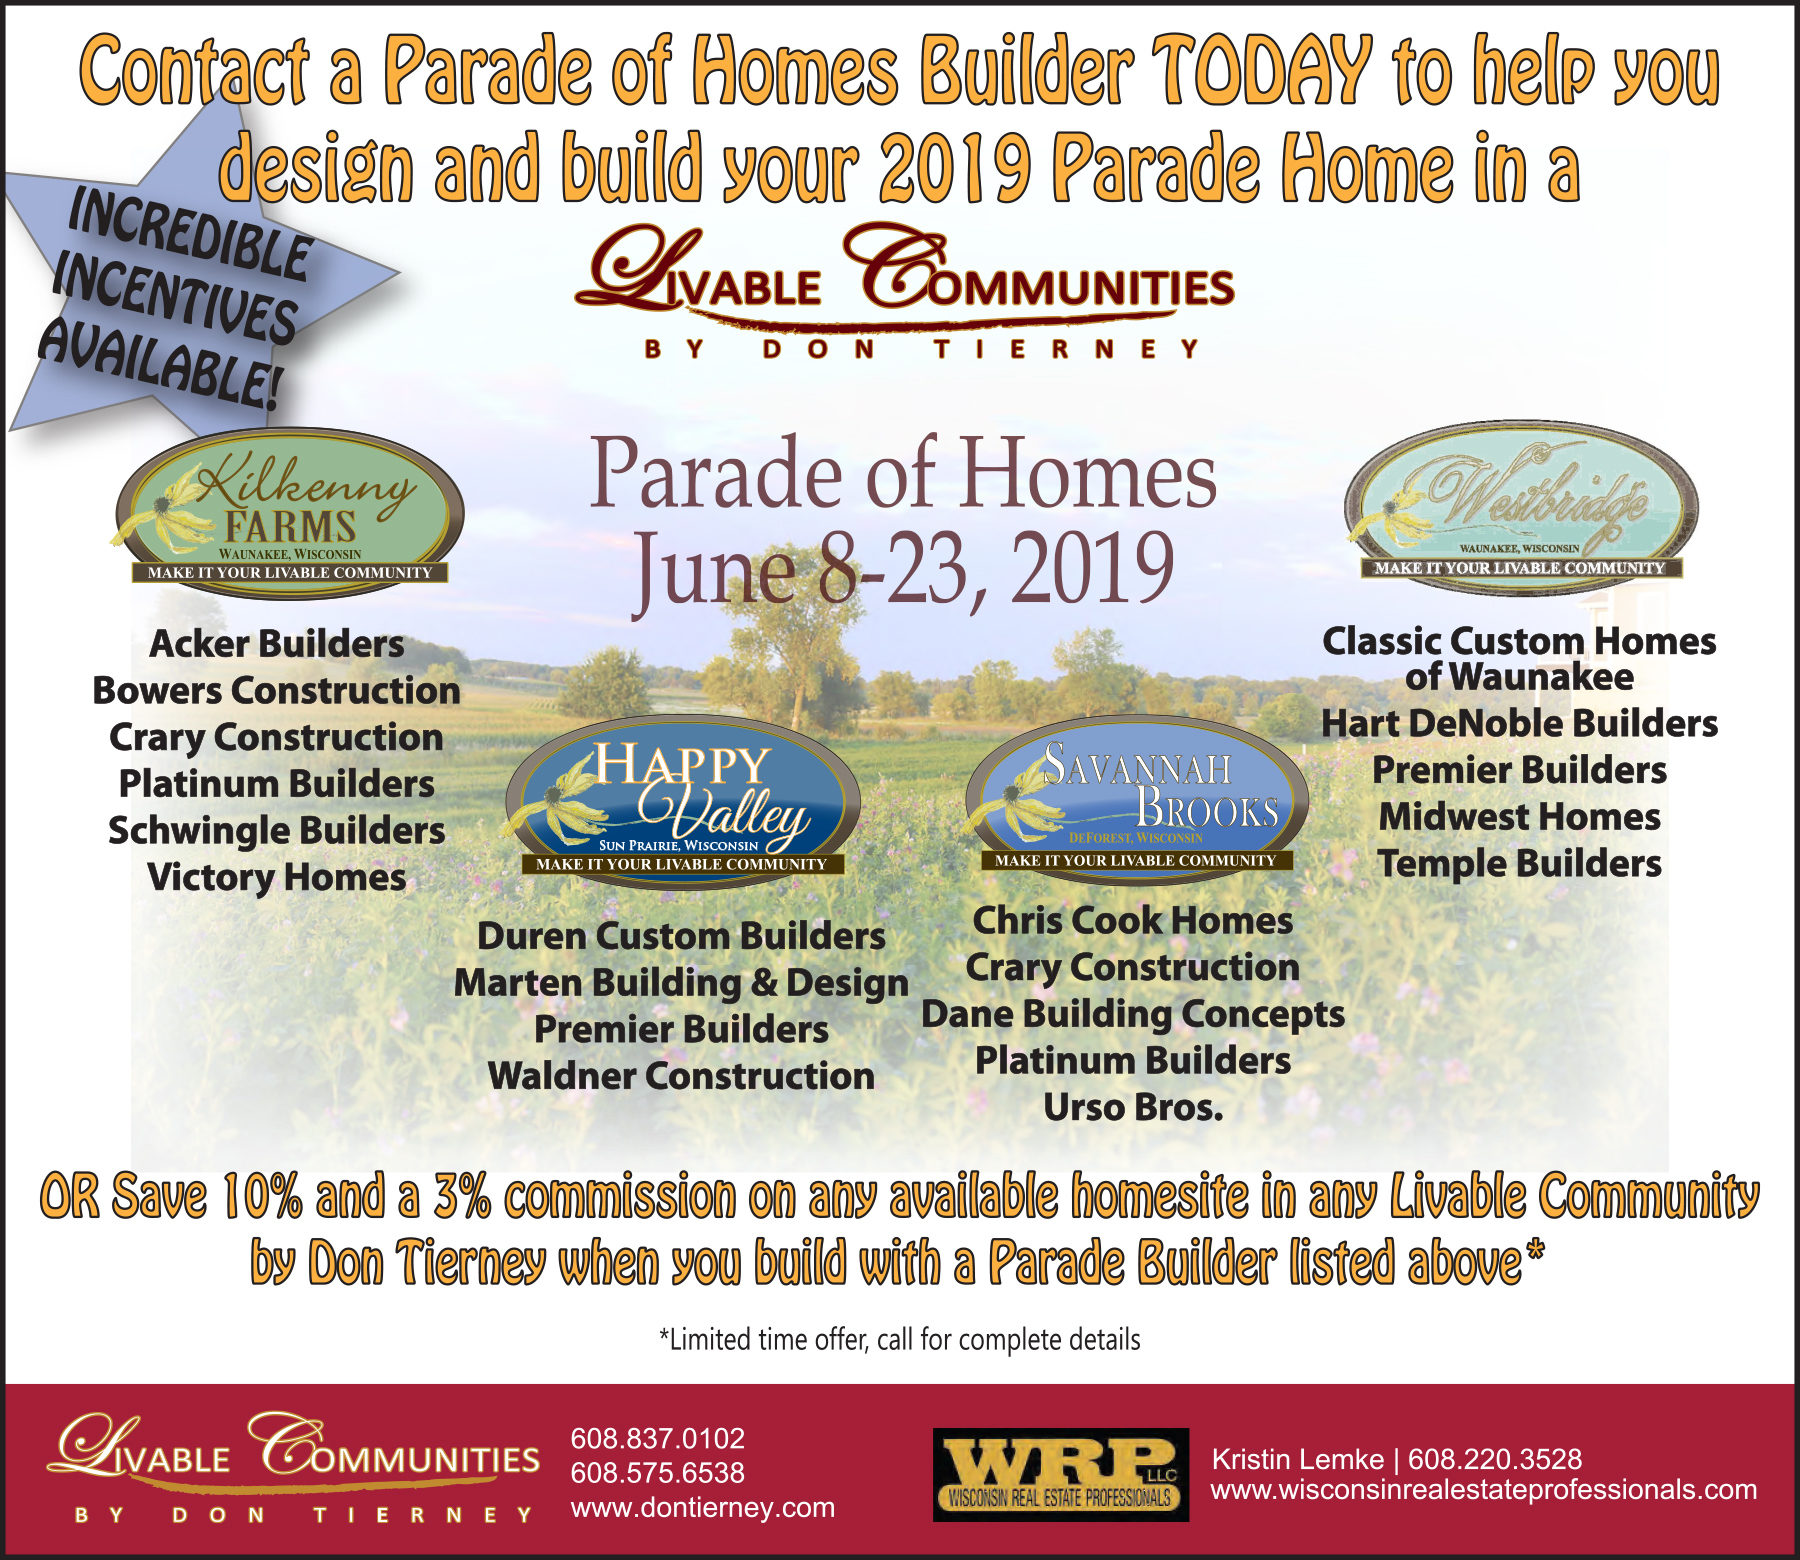 Build a 2019 Parade Home in one of our Livable Communities!